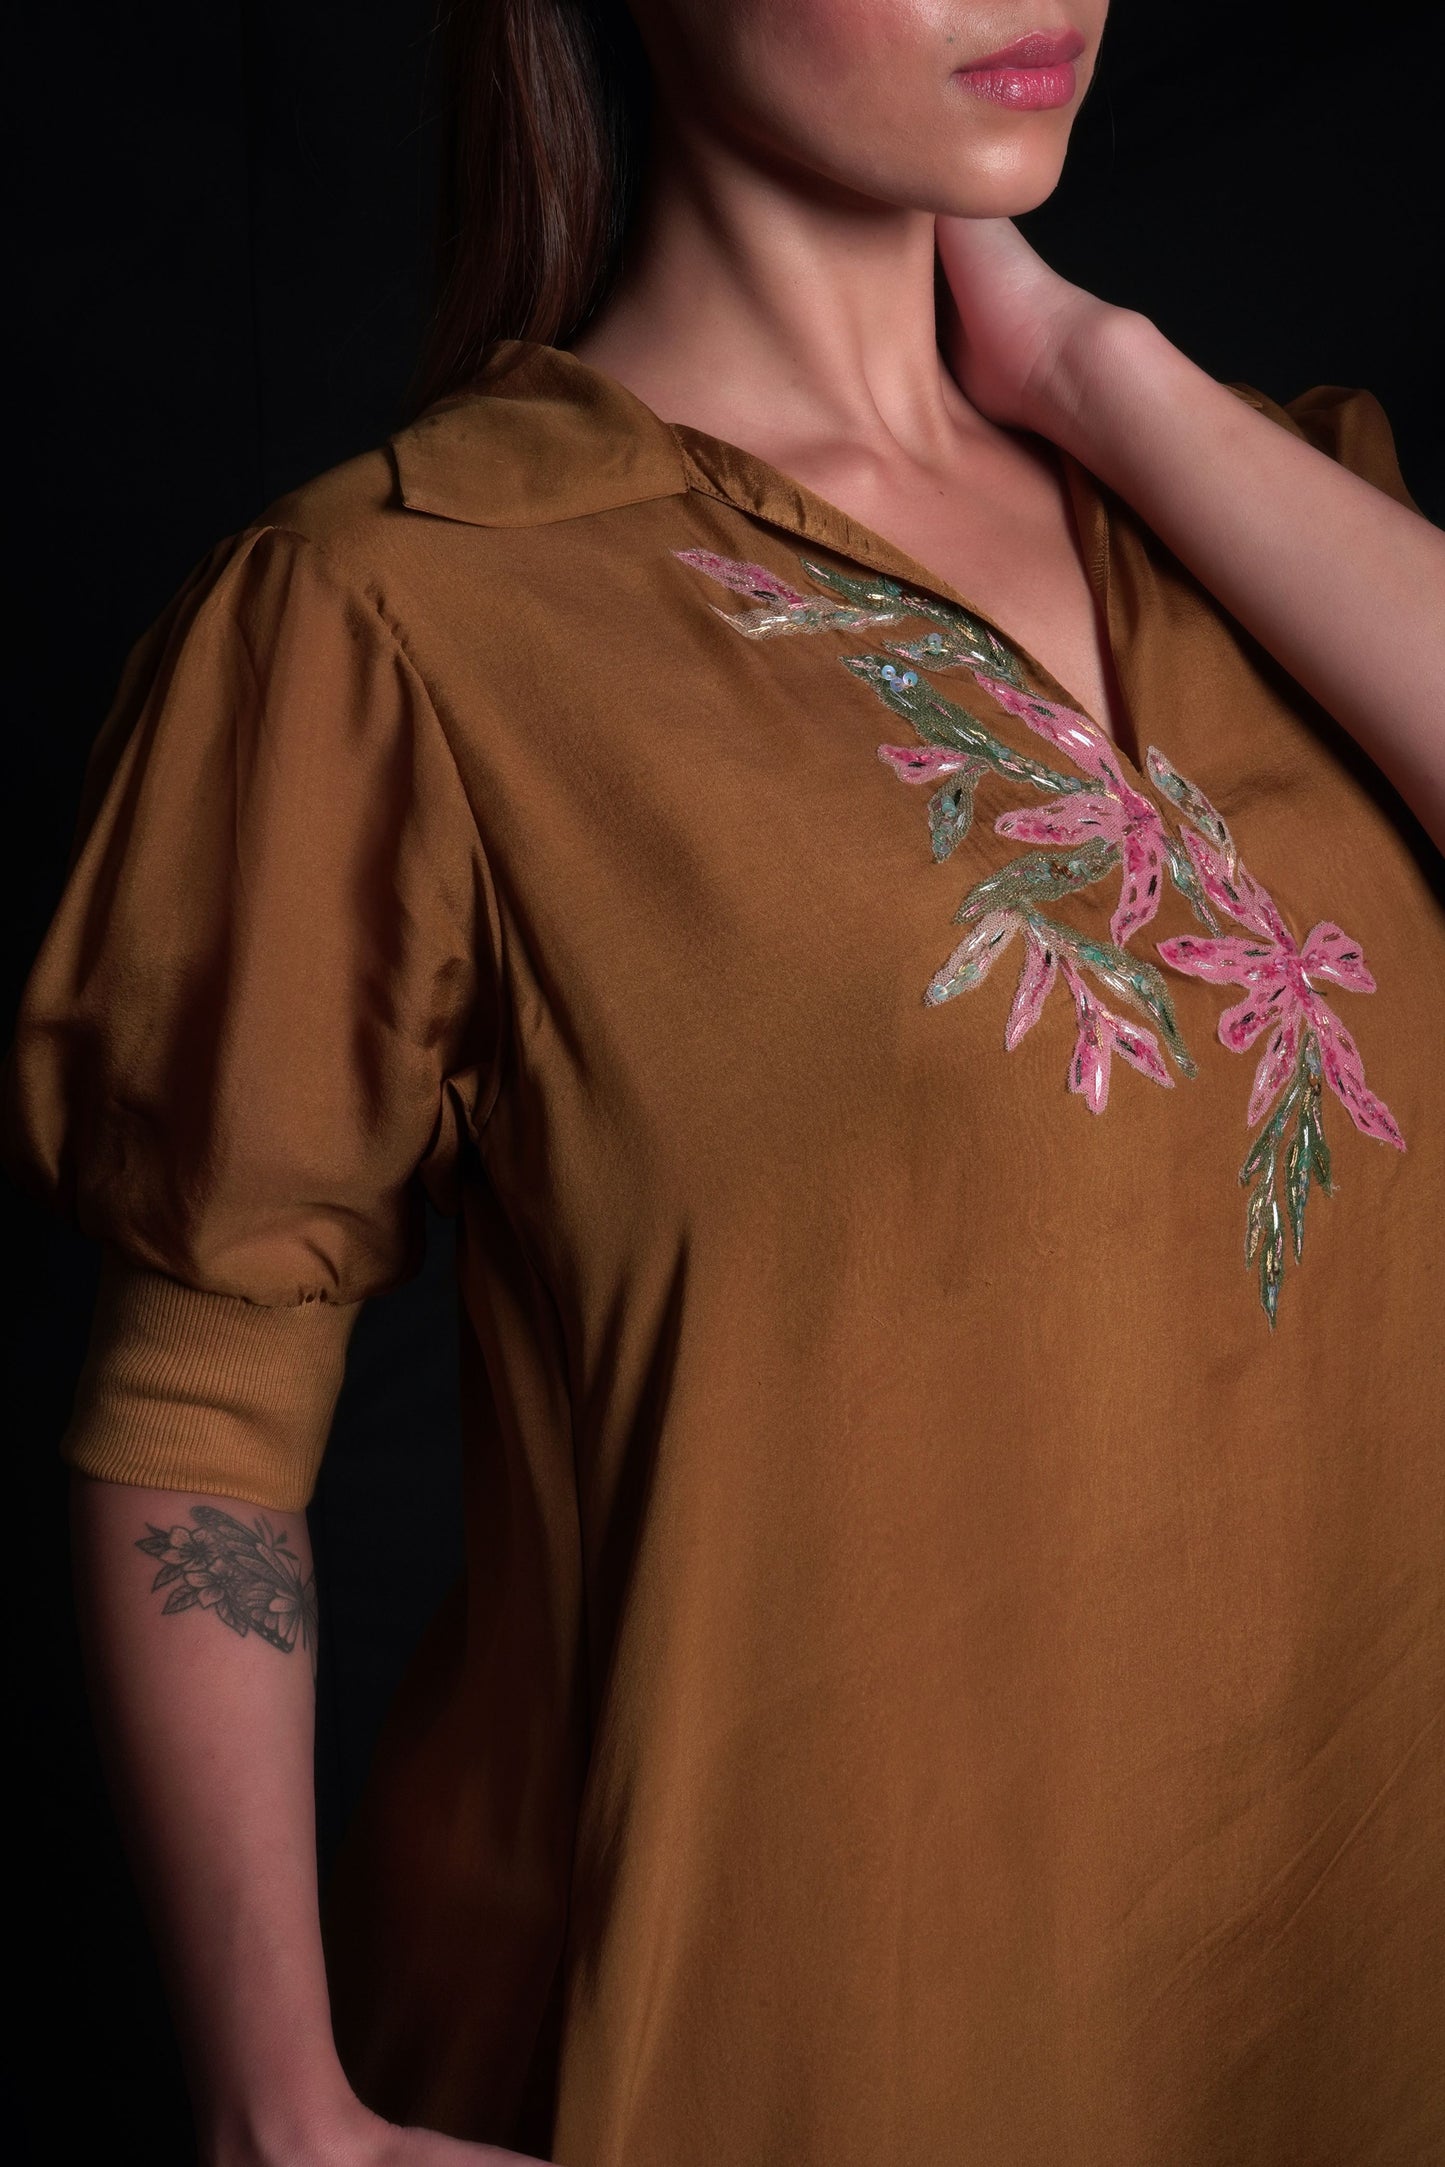 Golden Brown Collared Dress With Embroidery